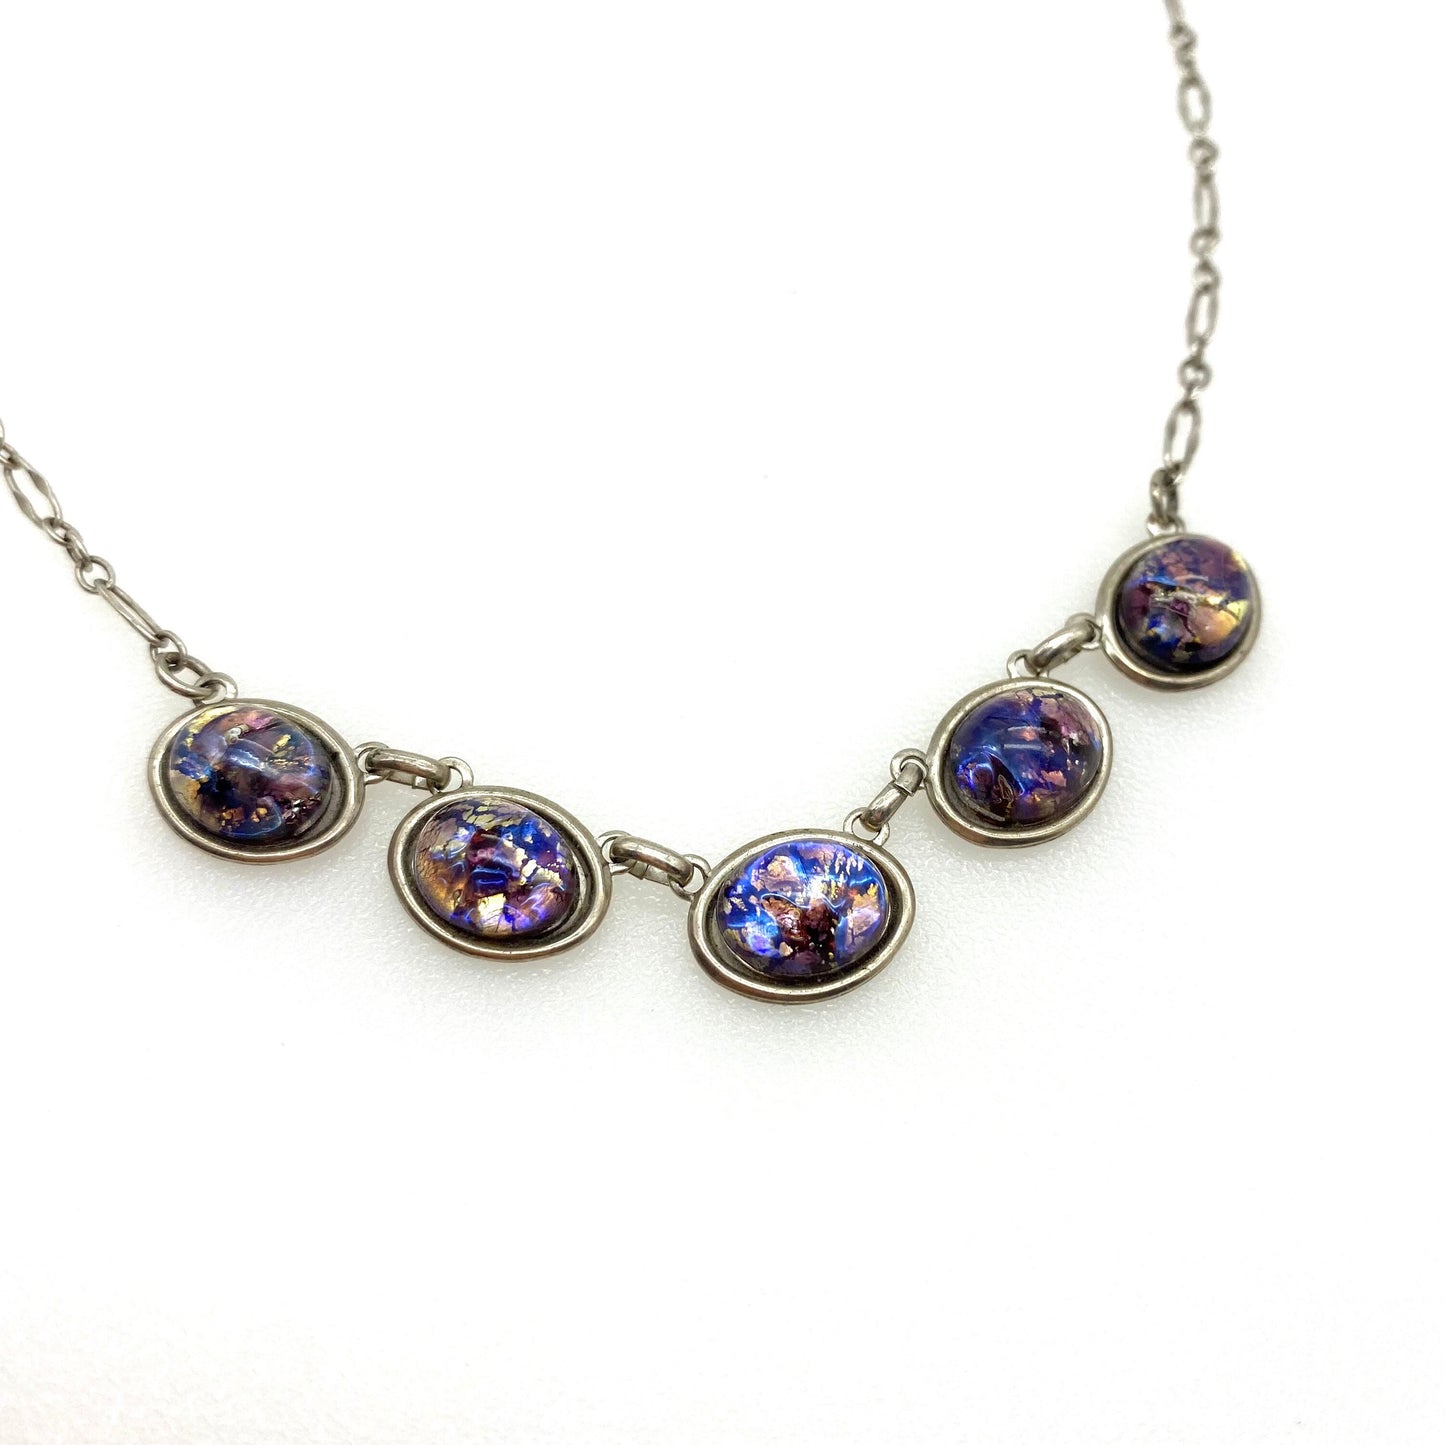 Signed 'OPLA 925' Silver Necklace with Five Art Glass Glass Cabochons